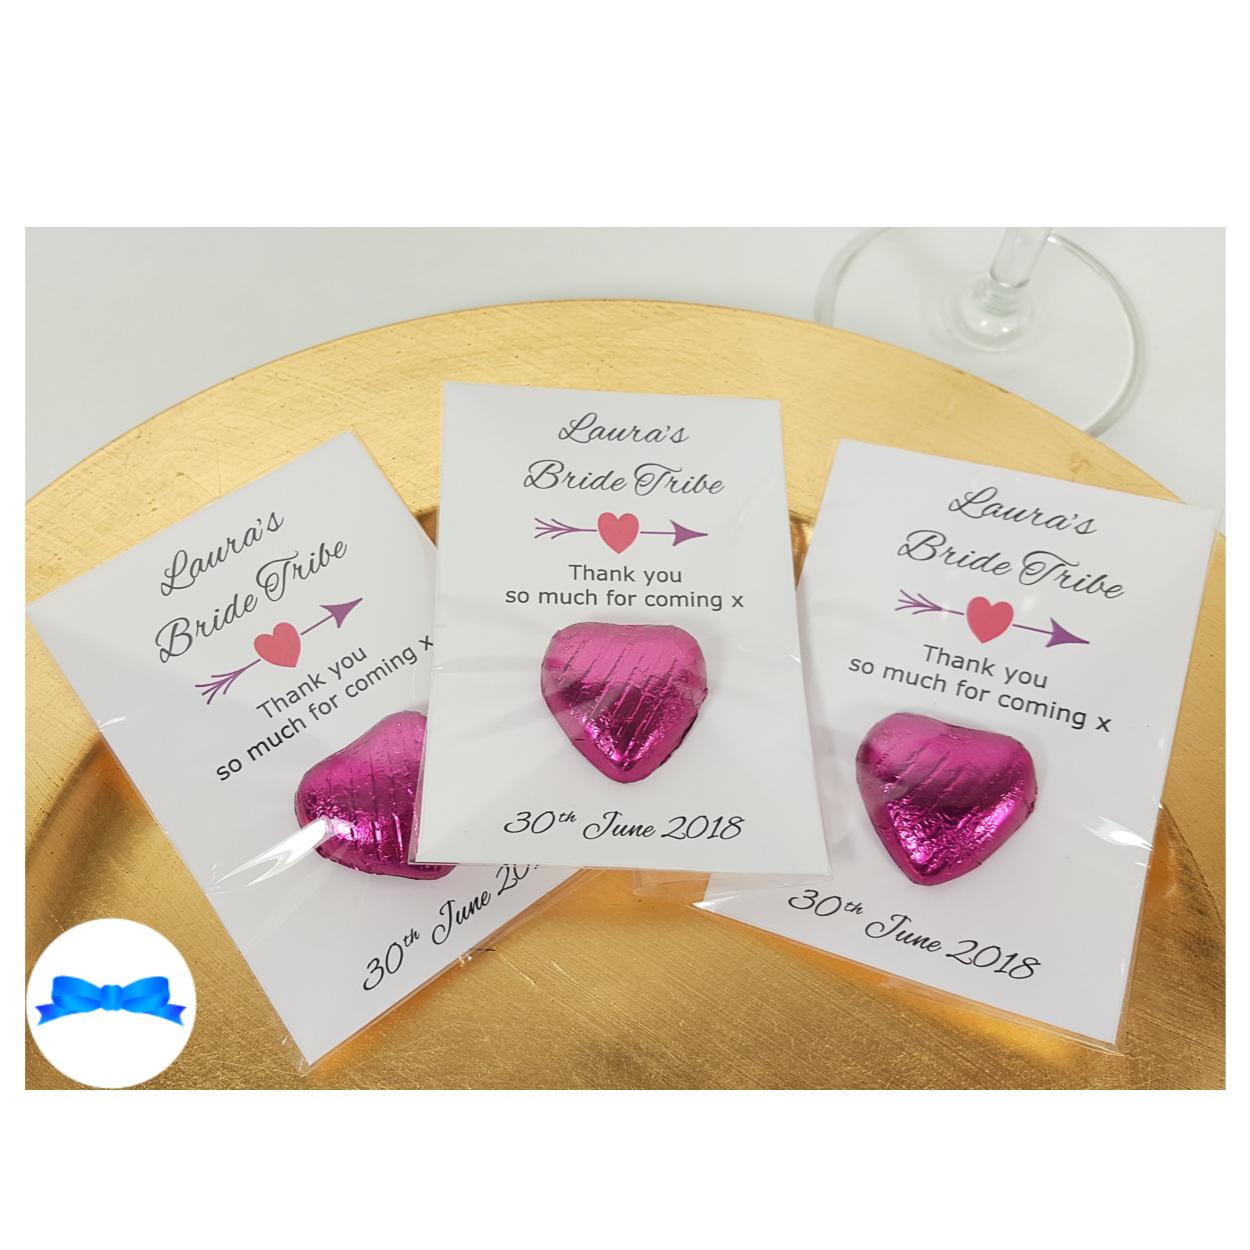 Personalised hen party Favours with heart and arrow